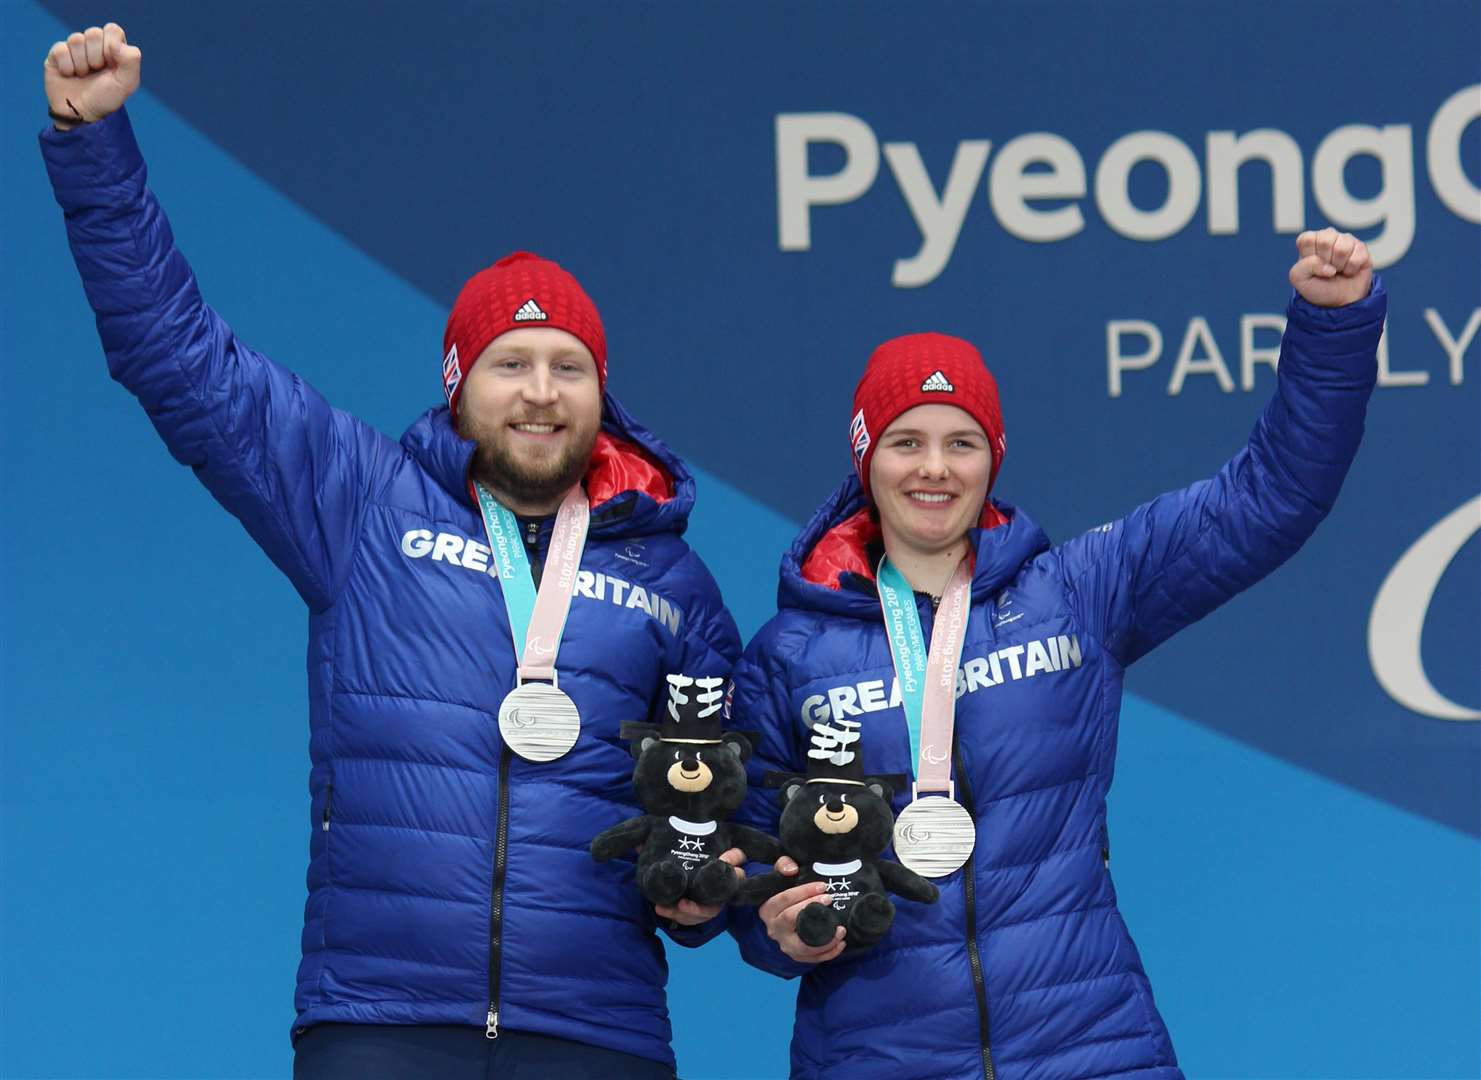 Millie Knight and her guide Brett Wild celebrate winning silver at the Wintger Paralympics in PyeonChang